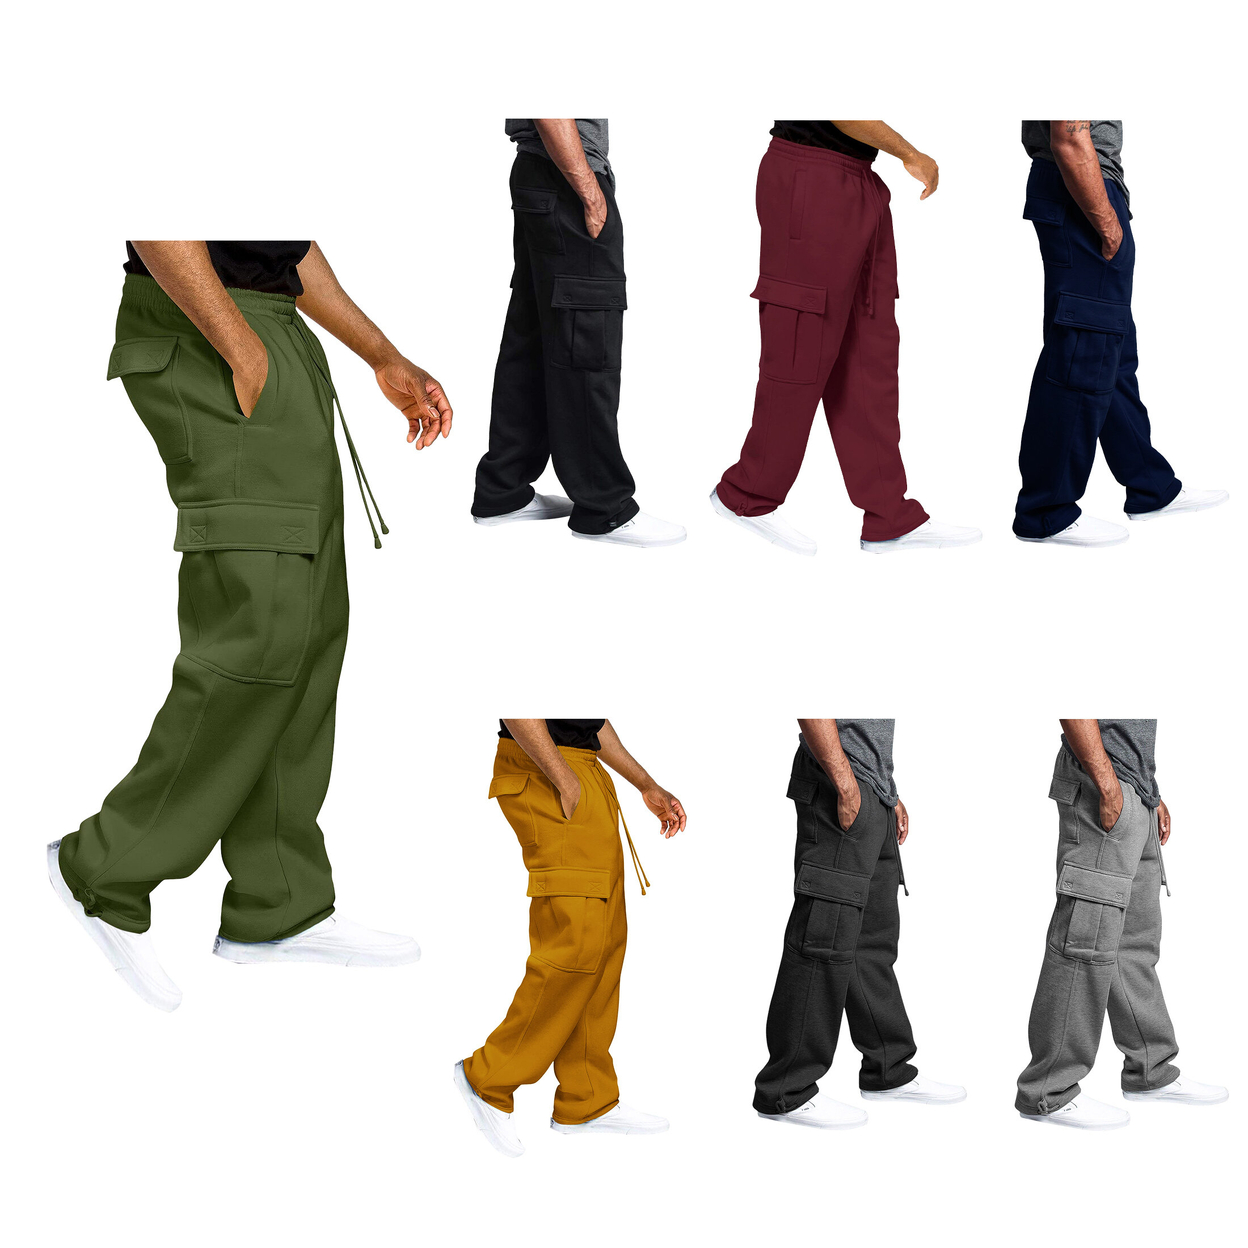 Men's Soft Casual Solid Fleece Lined Cargo Jogger Sweatpants With Pockets - Black, Small